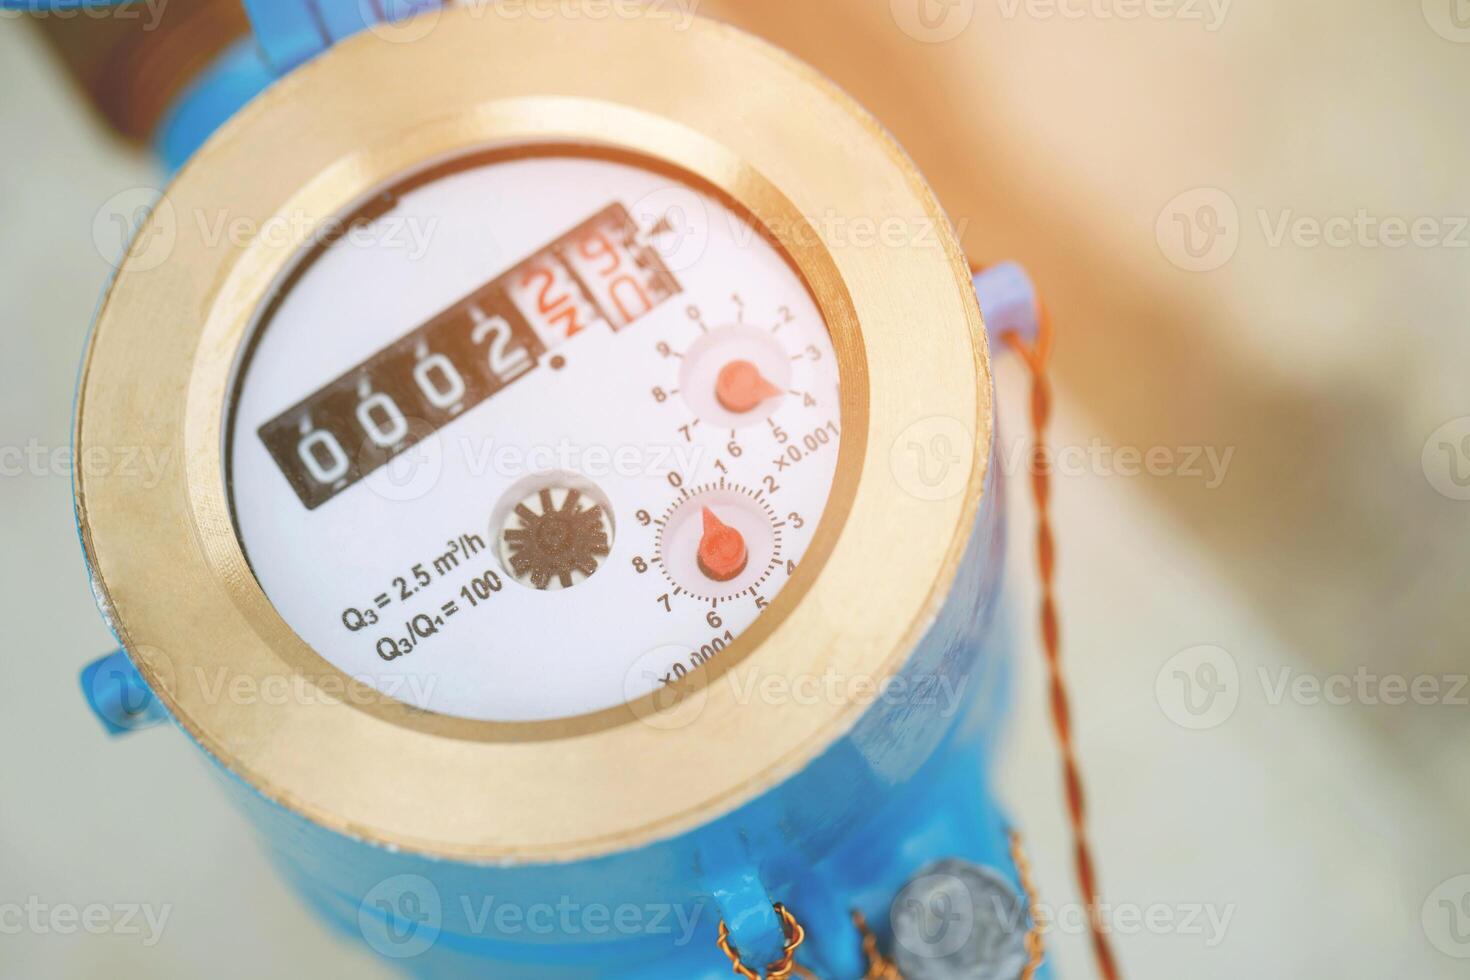 Water meters are used to record the amount of water consumption. using a gear and wheel system The numeral display has been completely sealed. Protection against water and dirt from the outside photo